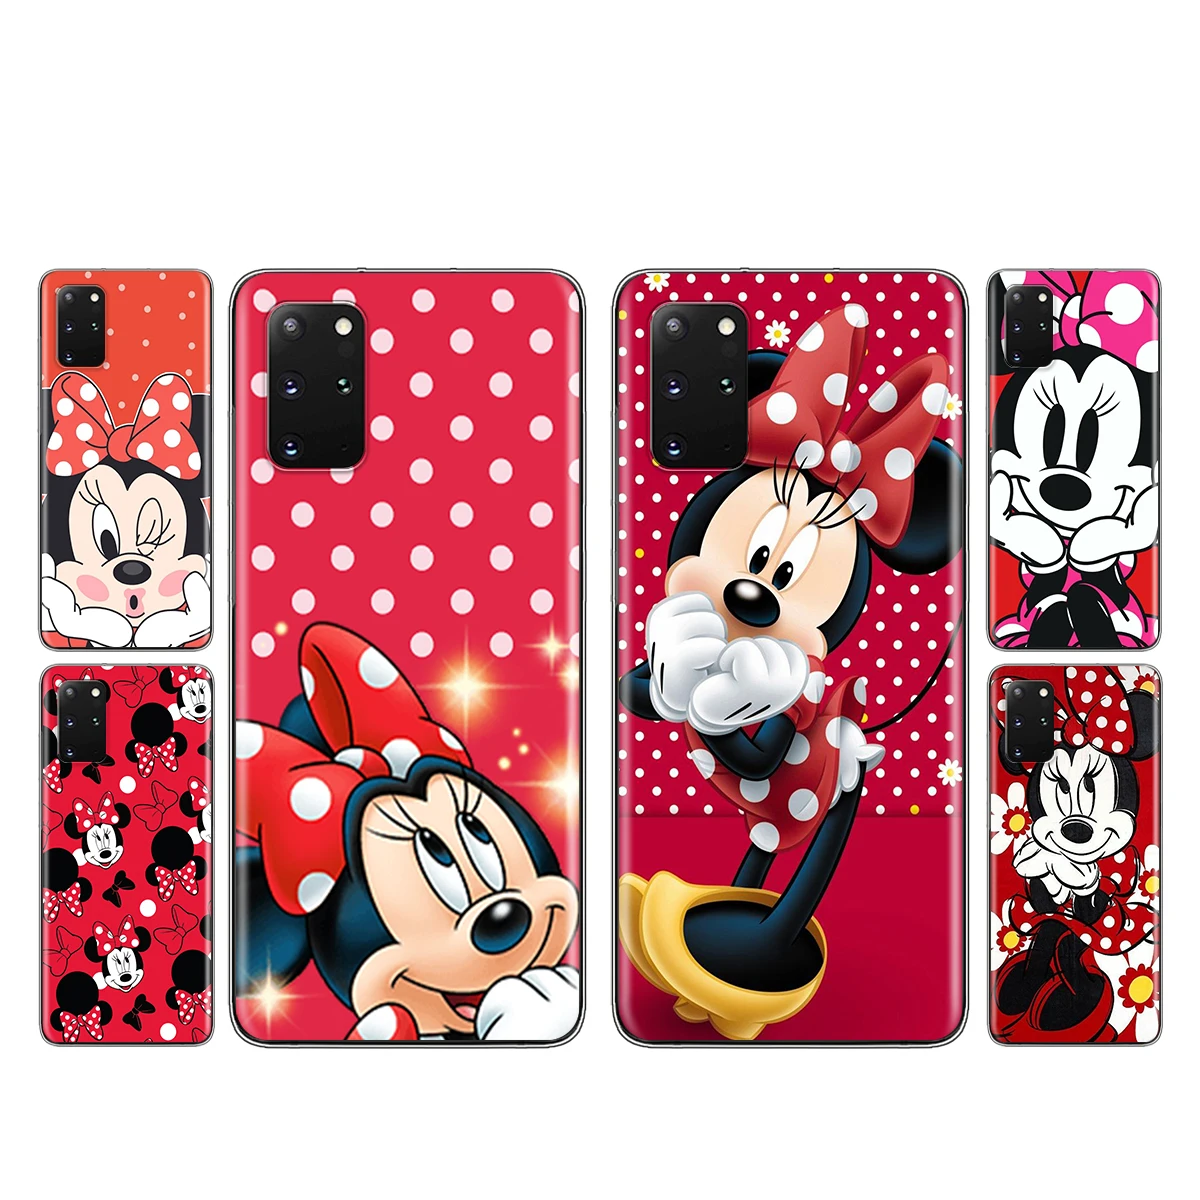 

Red Minnie Mouse For Samsung Galaxy A11 A12 A13 A22 A21S A31 A41 A42 A51 A71 A32 A52 A72 A02S A03S A52S Phone Case